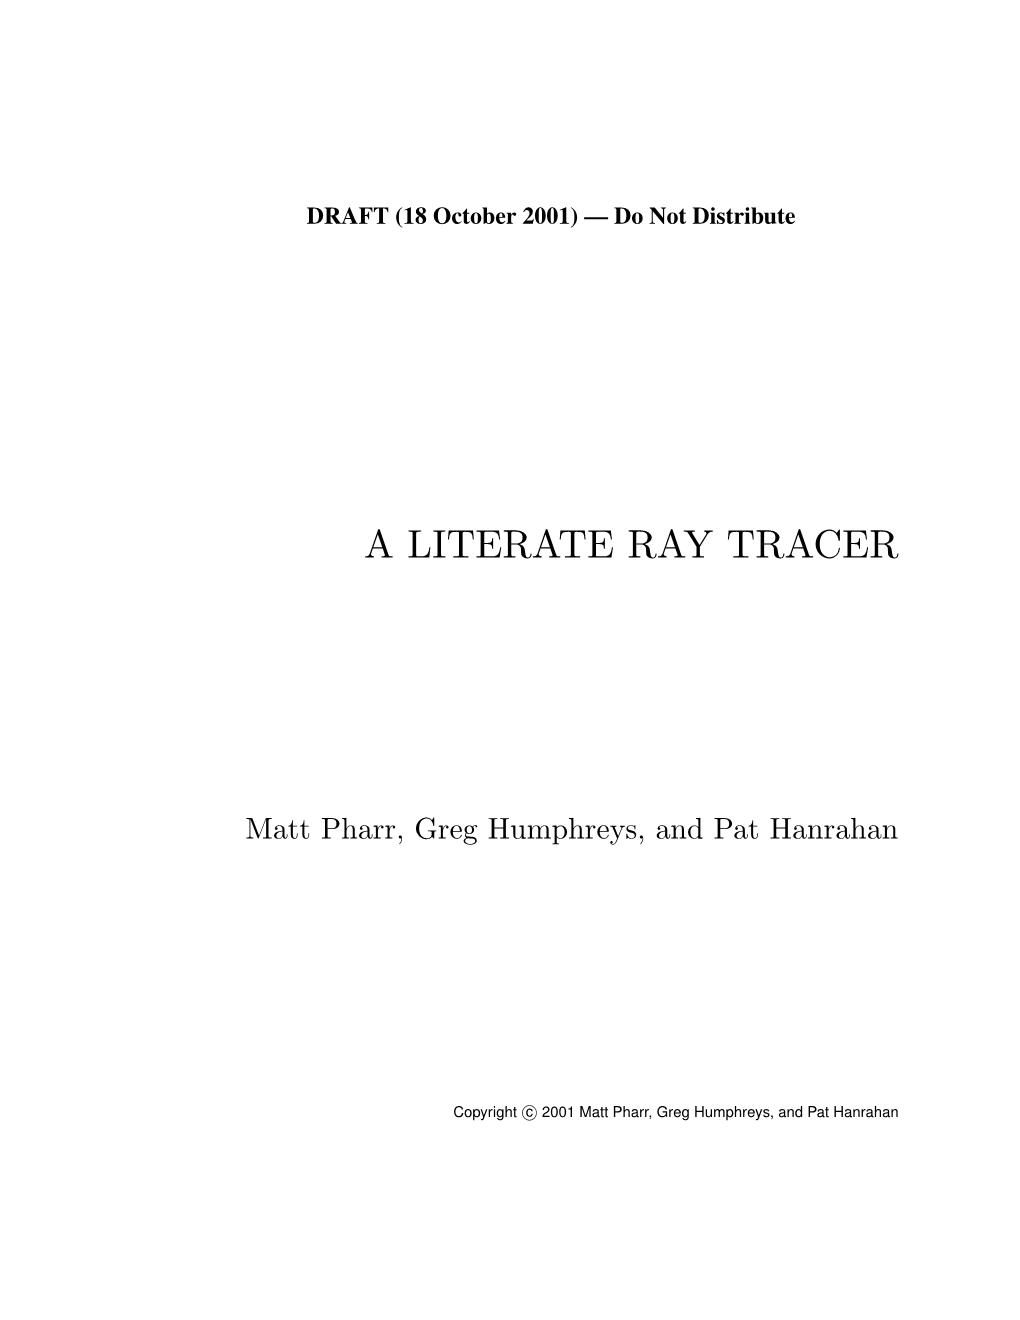 A Literate Ray Tracer